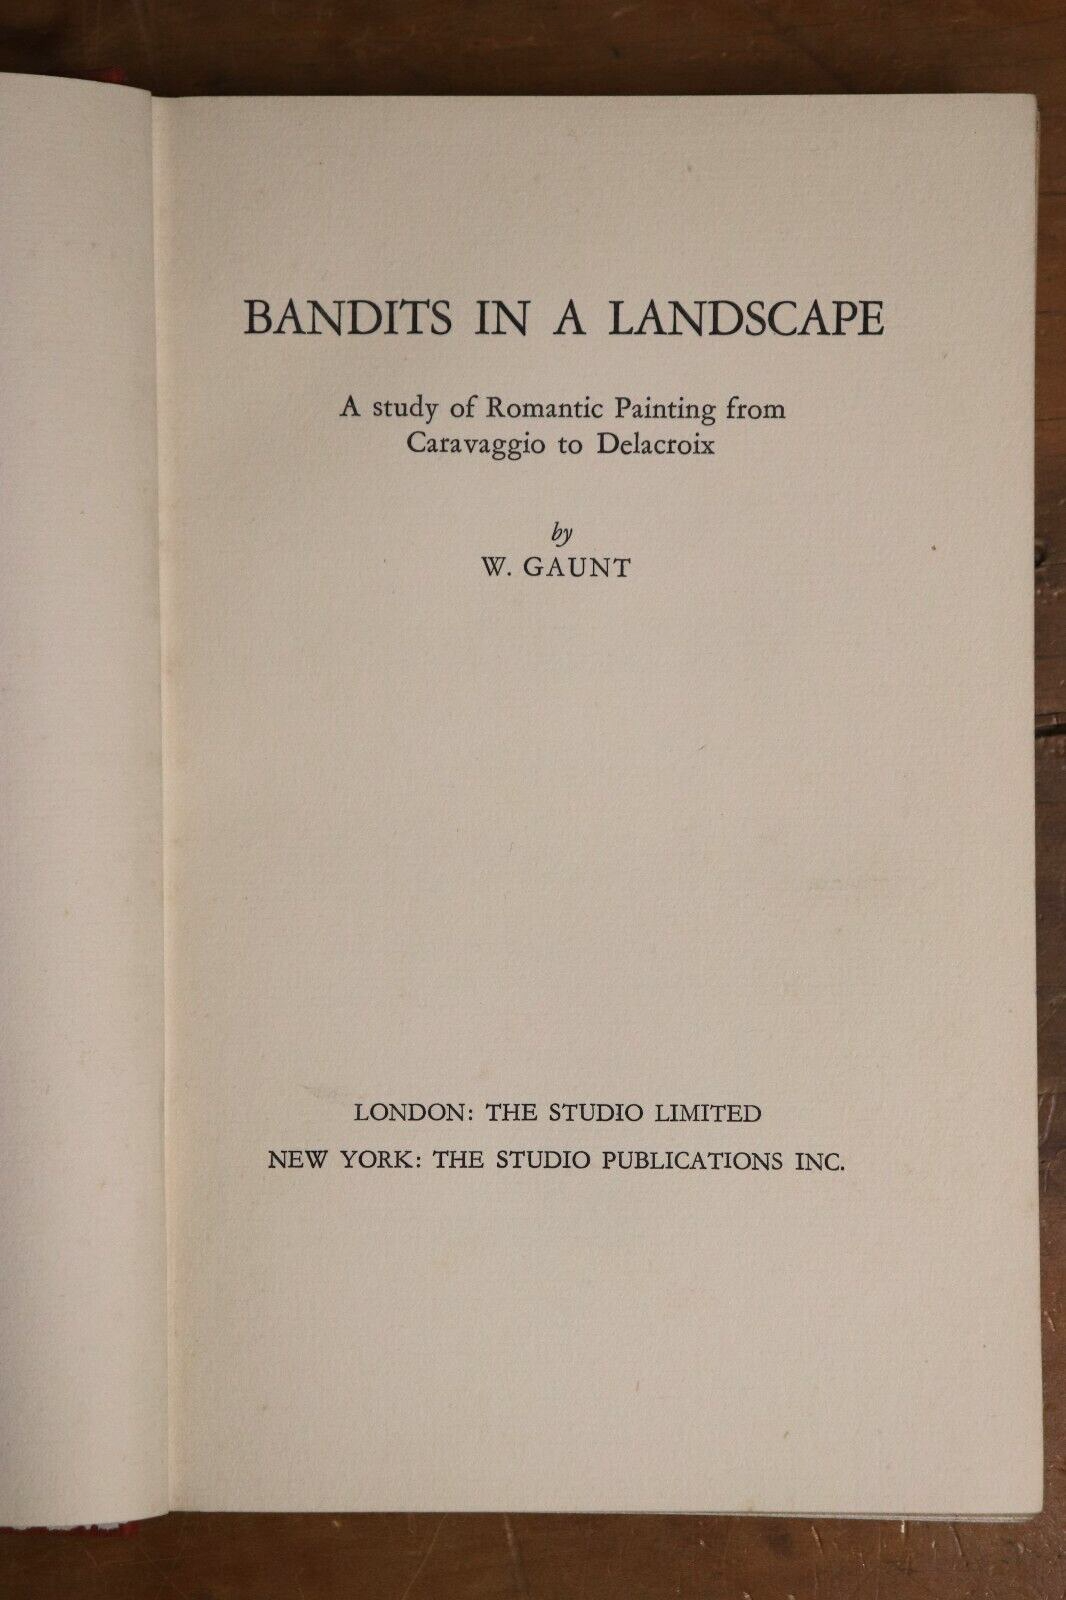 Bandits In A Landscape by W Gaunt - 1937 - 1st Edition Vintage Art Book - 0